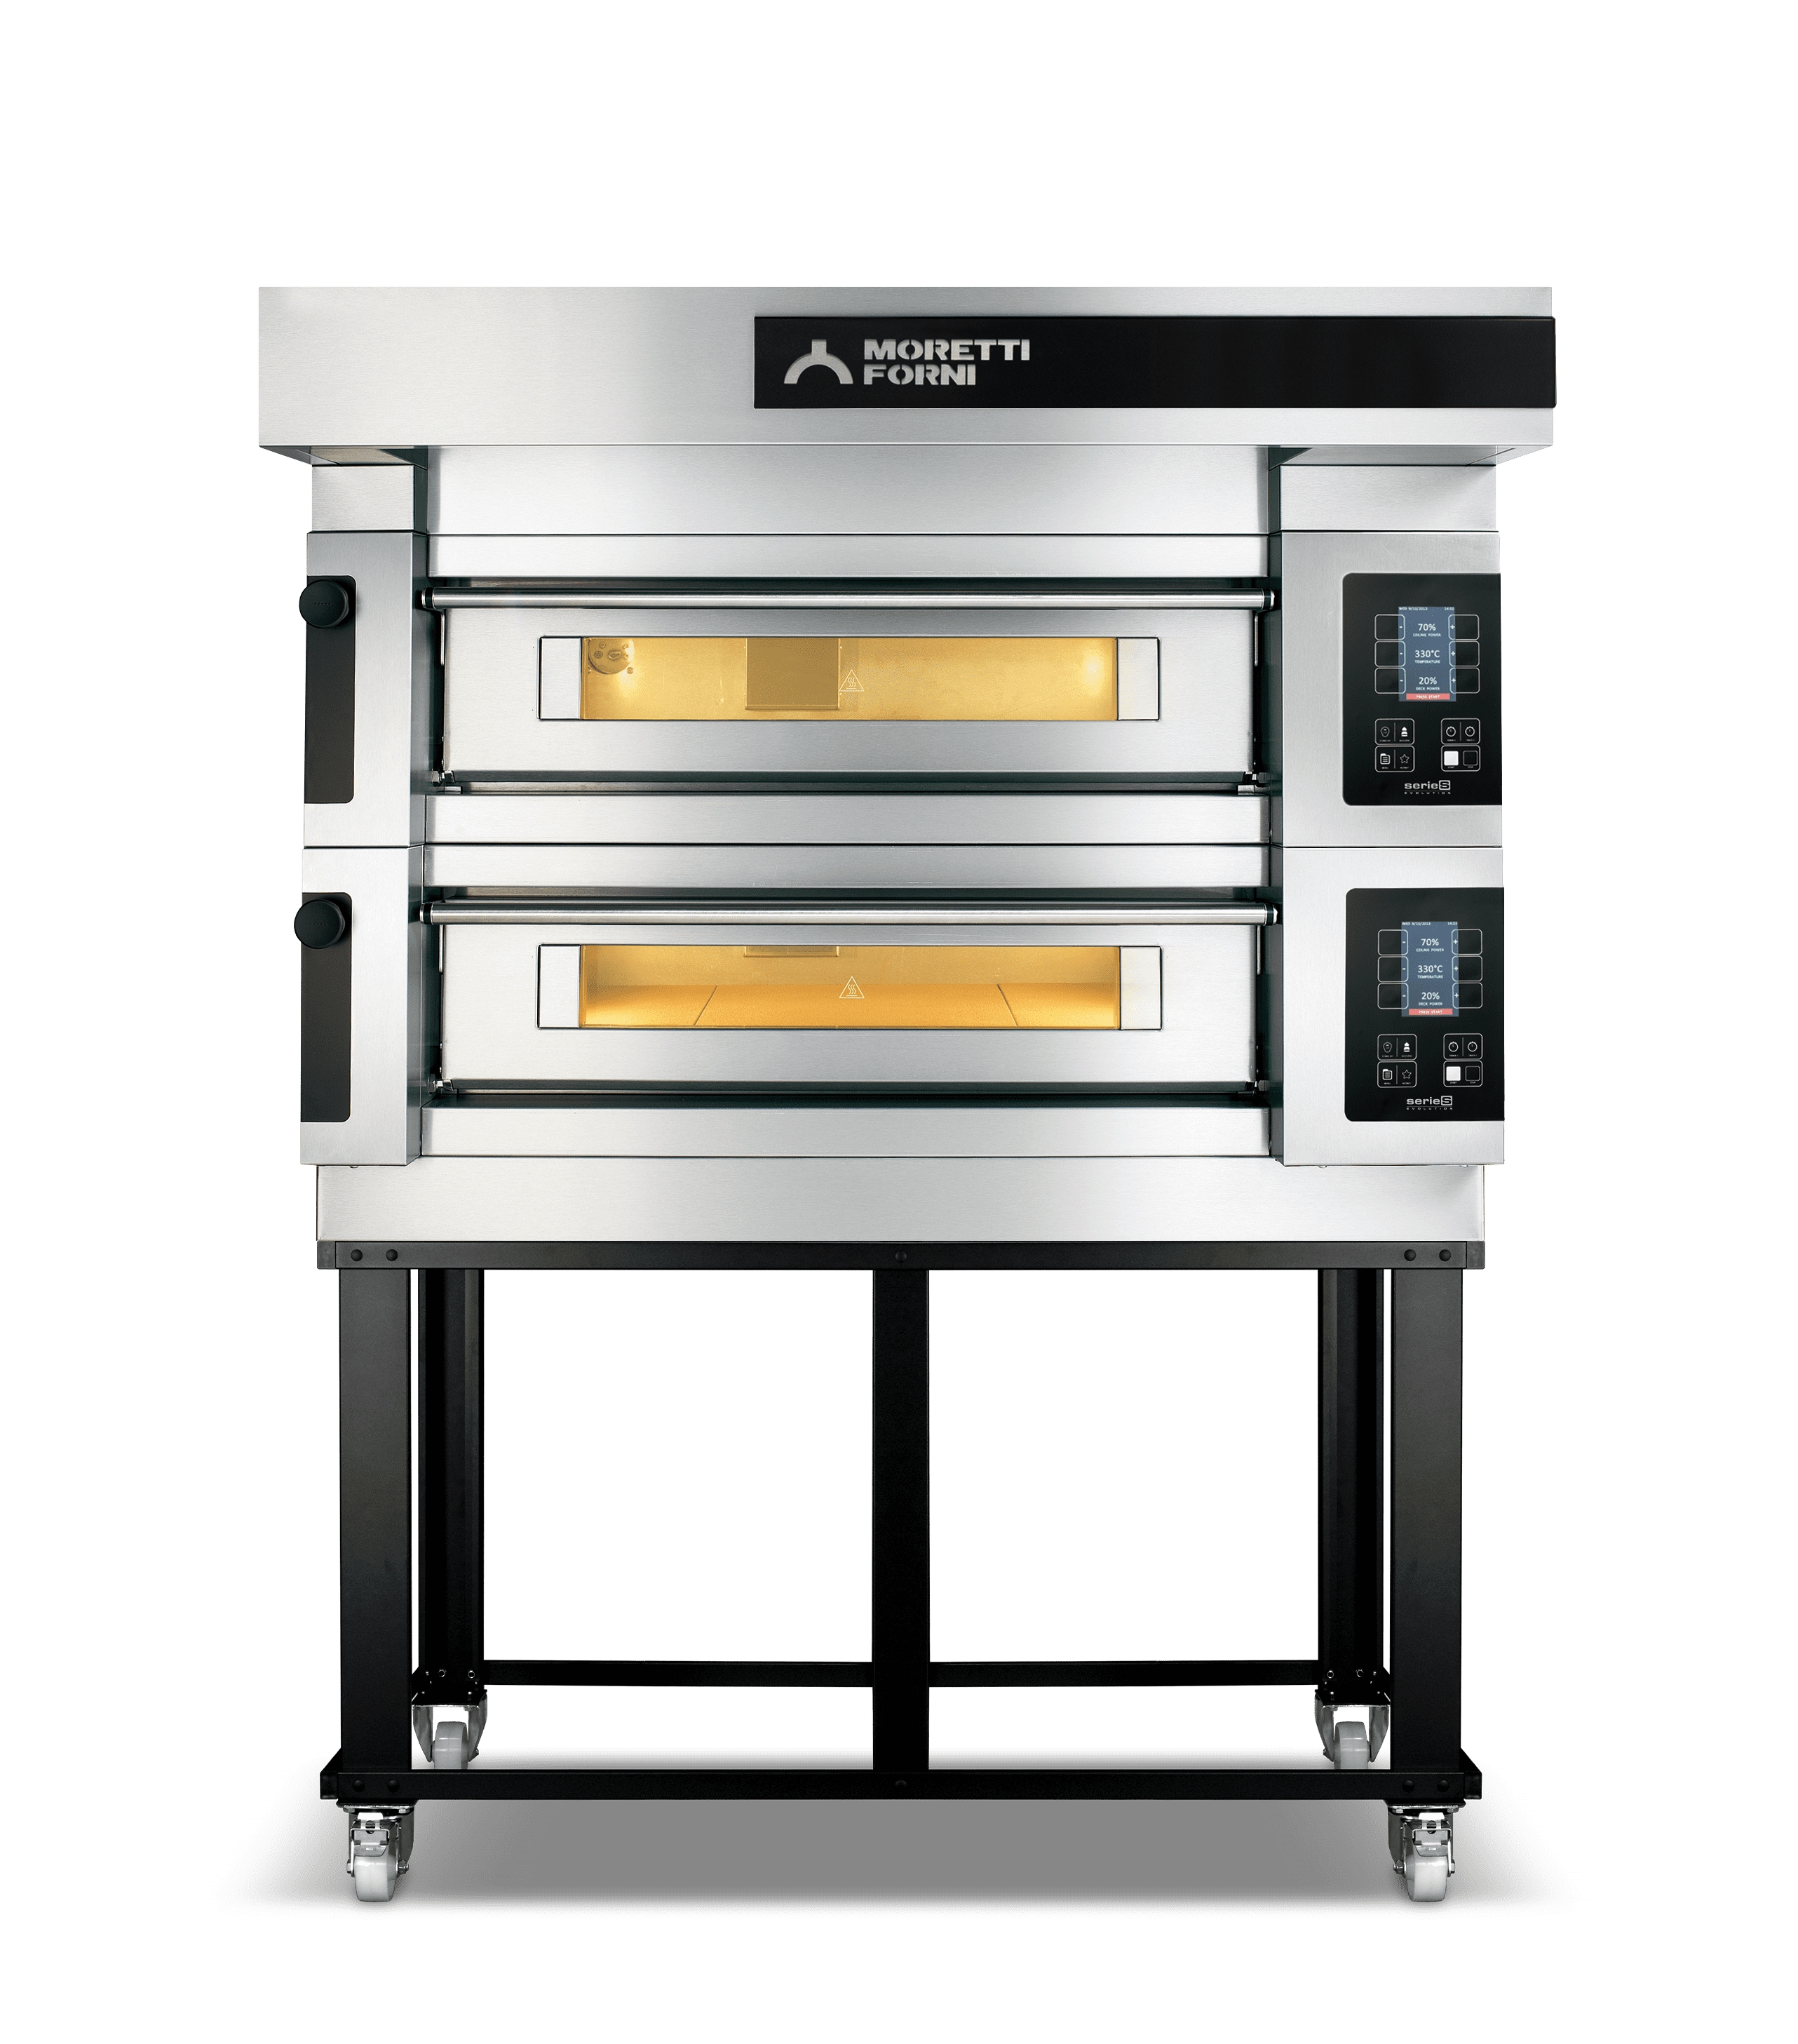 S100E2 - serie S modular Electric Pizza oven 37-1/2"x29x6-1/4 (Chamber)